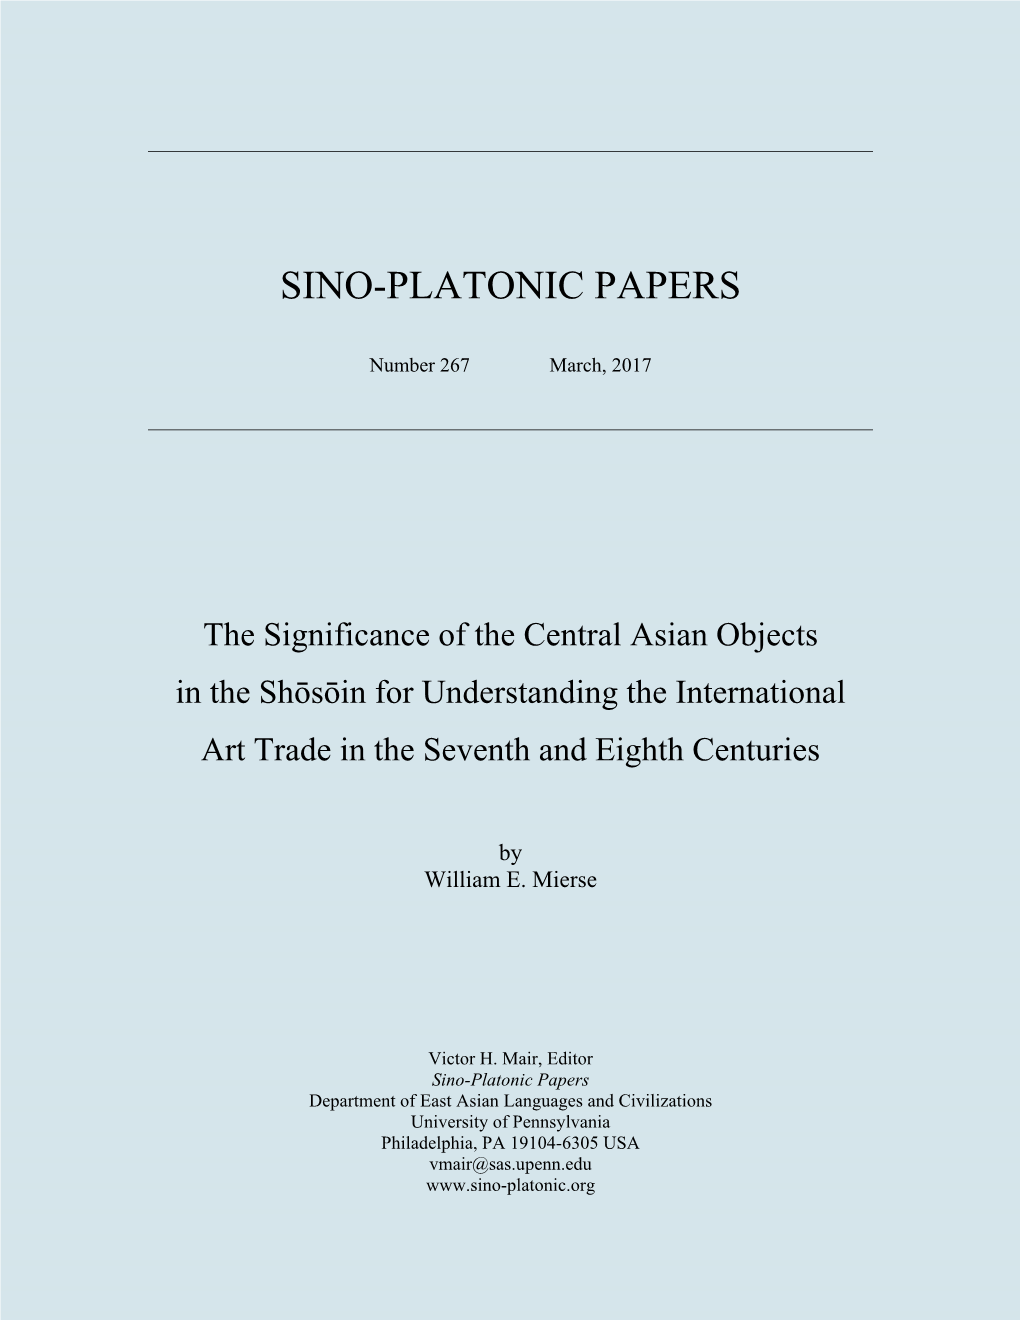 The Significance of the Central Asian Objects in the Shōsōin for Understanding the International Art Trade in the Seventh and Eighth Centuries